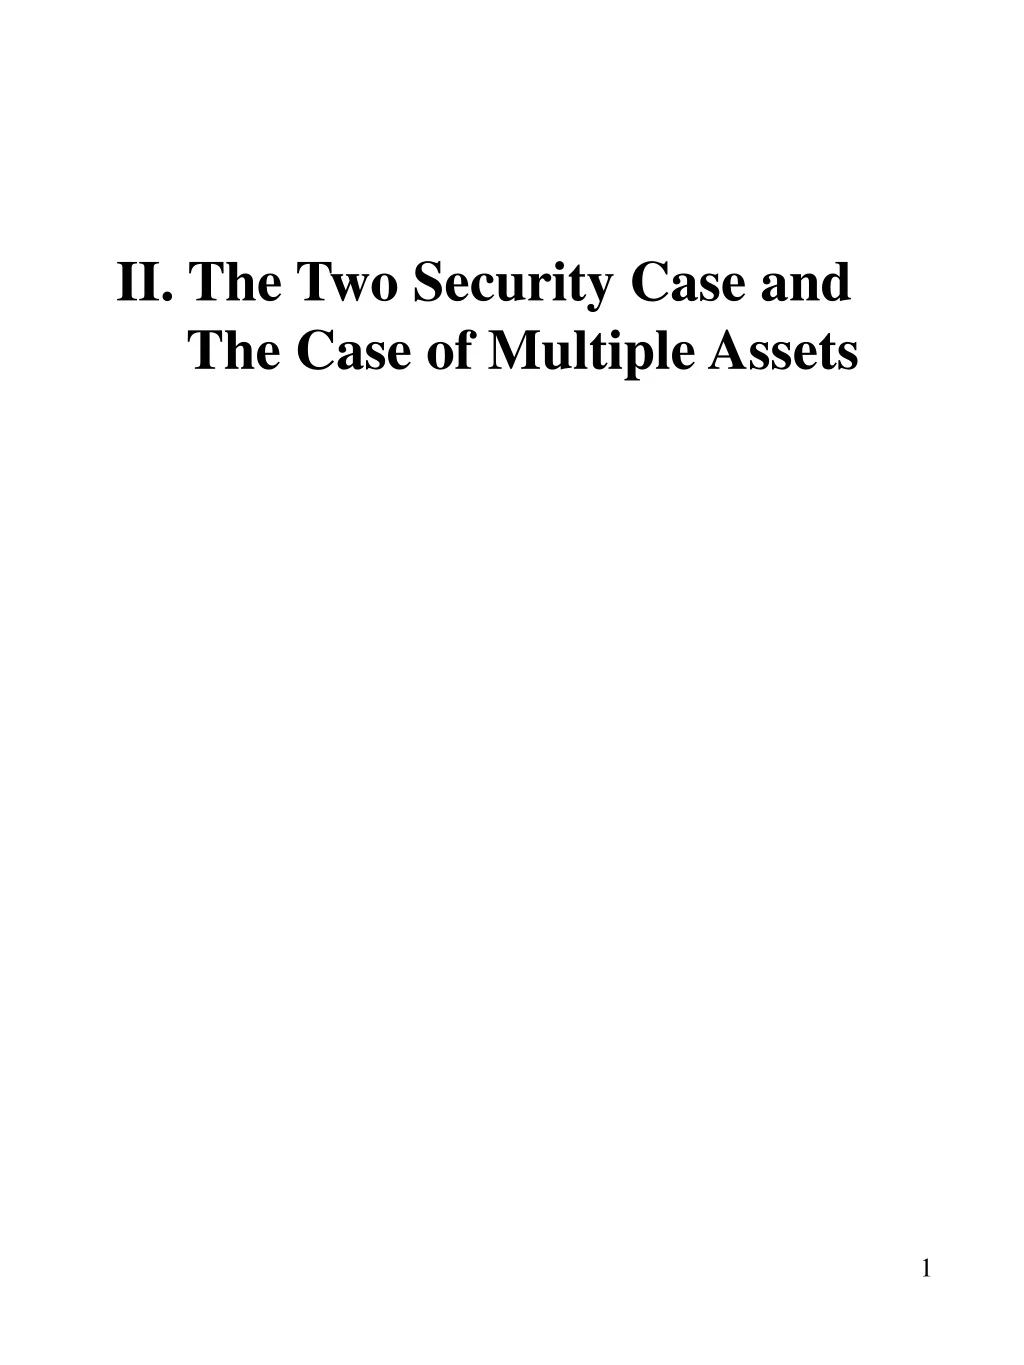 ii the two security case and the case of multiple